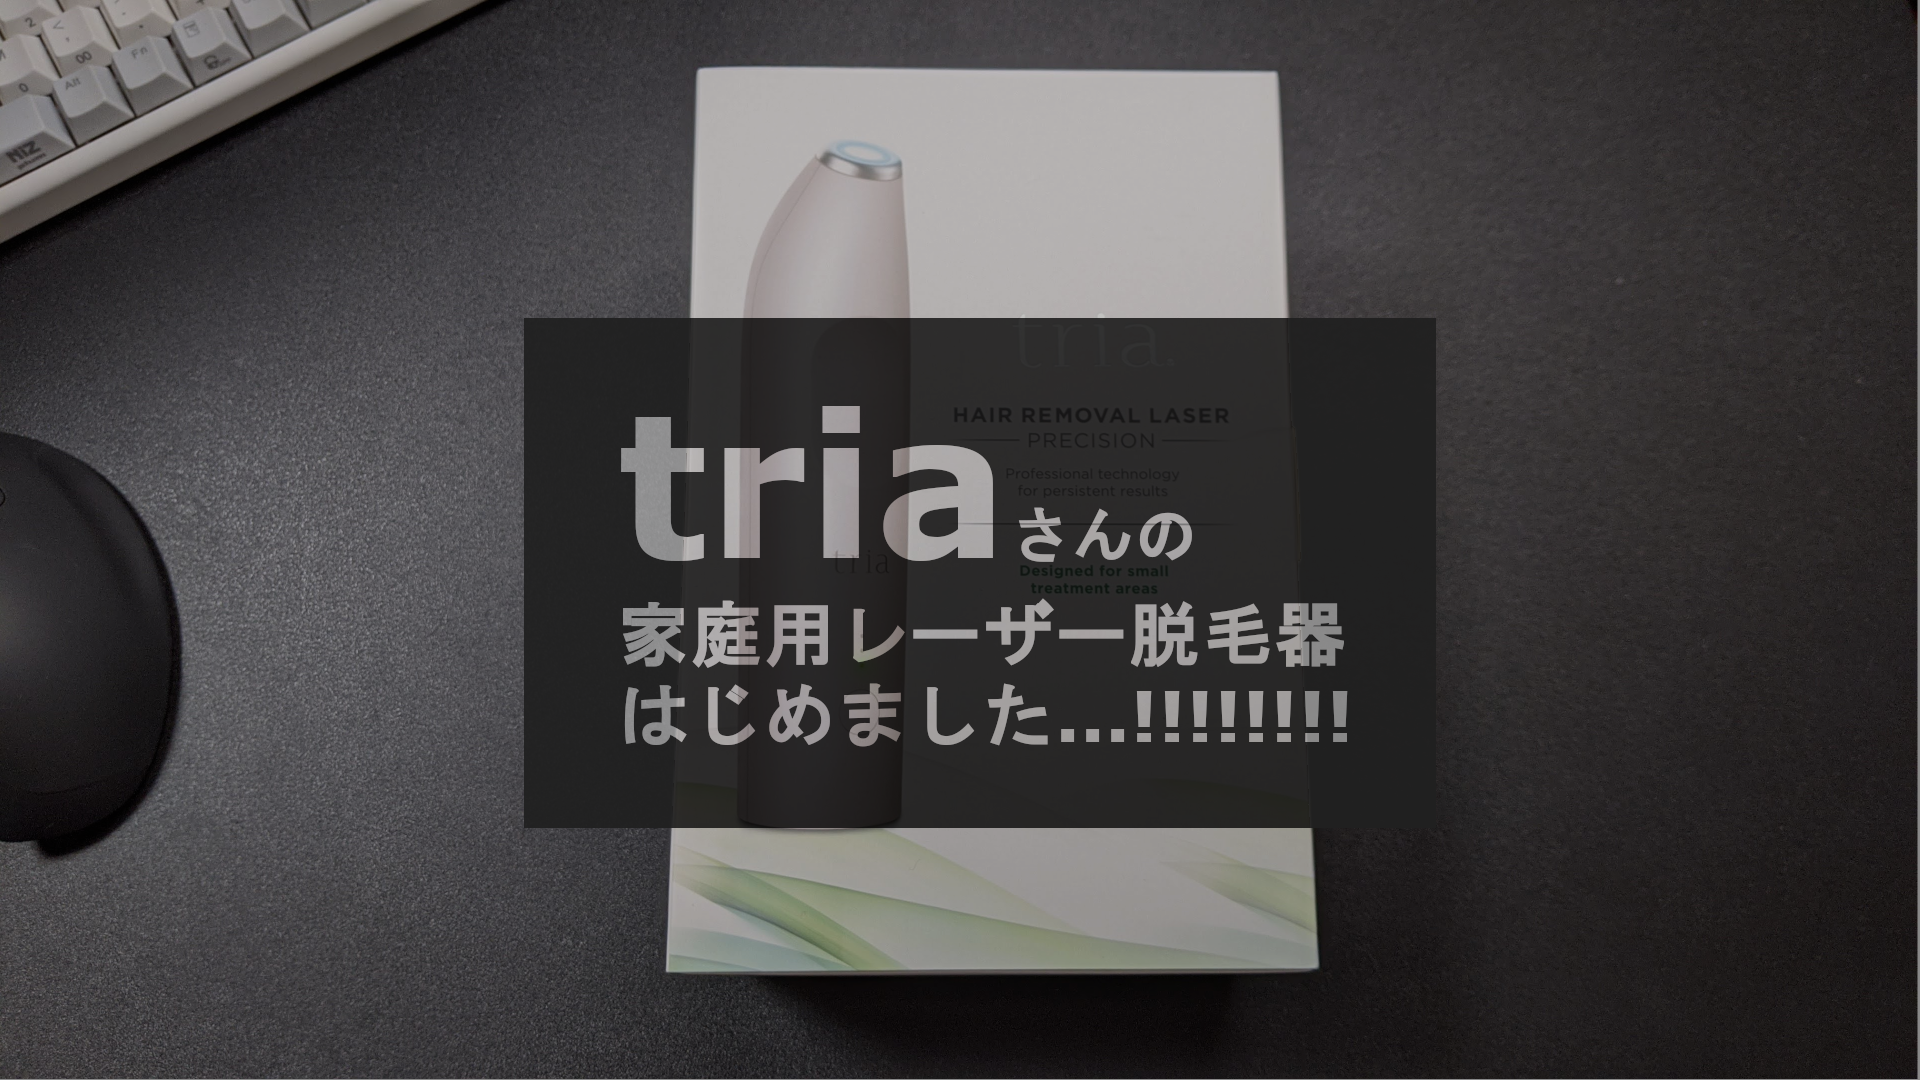 You are currently viewing 「tria」さんの家庭用レーザー脱毛器はじめました…!!!!! (挑戦中)